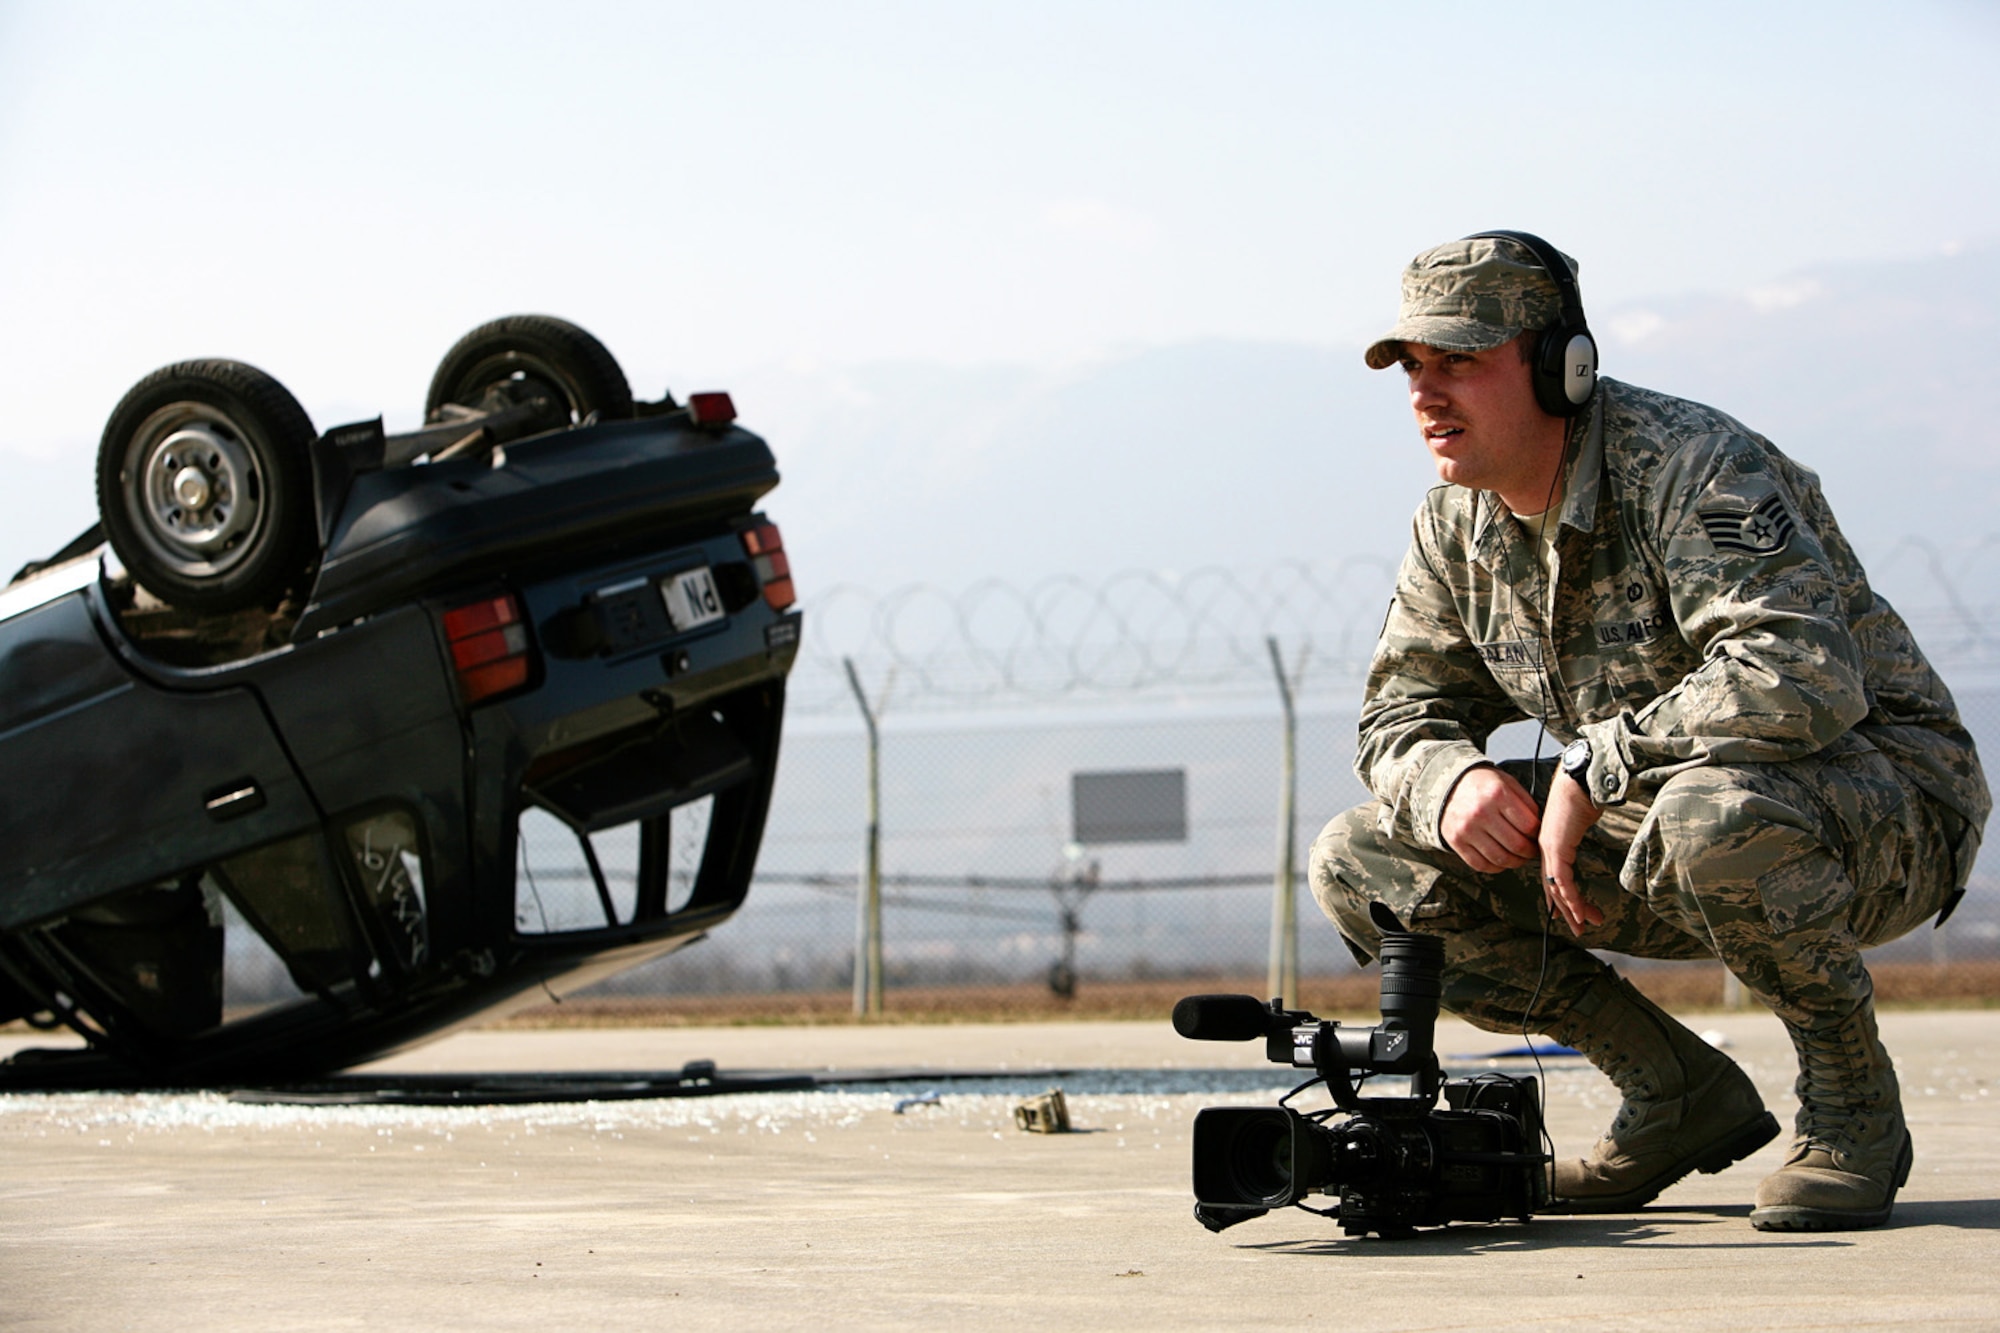 Staff Sgt. Todd Kabalan, a broadcast journalist assigned to American Forces Network Aviano, Defense Media Activity, documents a firefighter training session at Aviano Air Base, Italy,  March 18.  Staff Sgt. Kabalan  is one of five members of AFN Aviano who were recently recognized as among the best in Air Force broadcasting during the 2008 Air Force Media Contest. Sergeant Kabalan received first place in the Radio News Report and Television Newsbreak categories. (U.S. Air Force photo/Senior Master Sgt. Robert W. Valenca)    